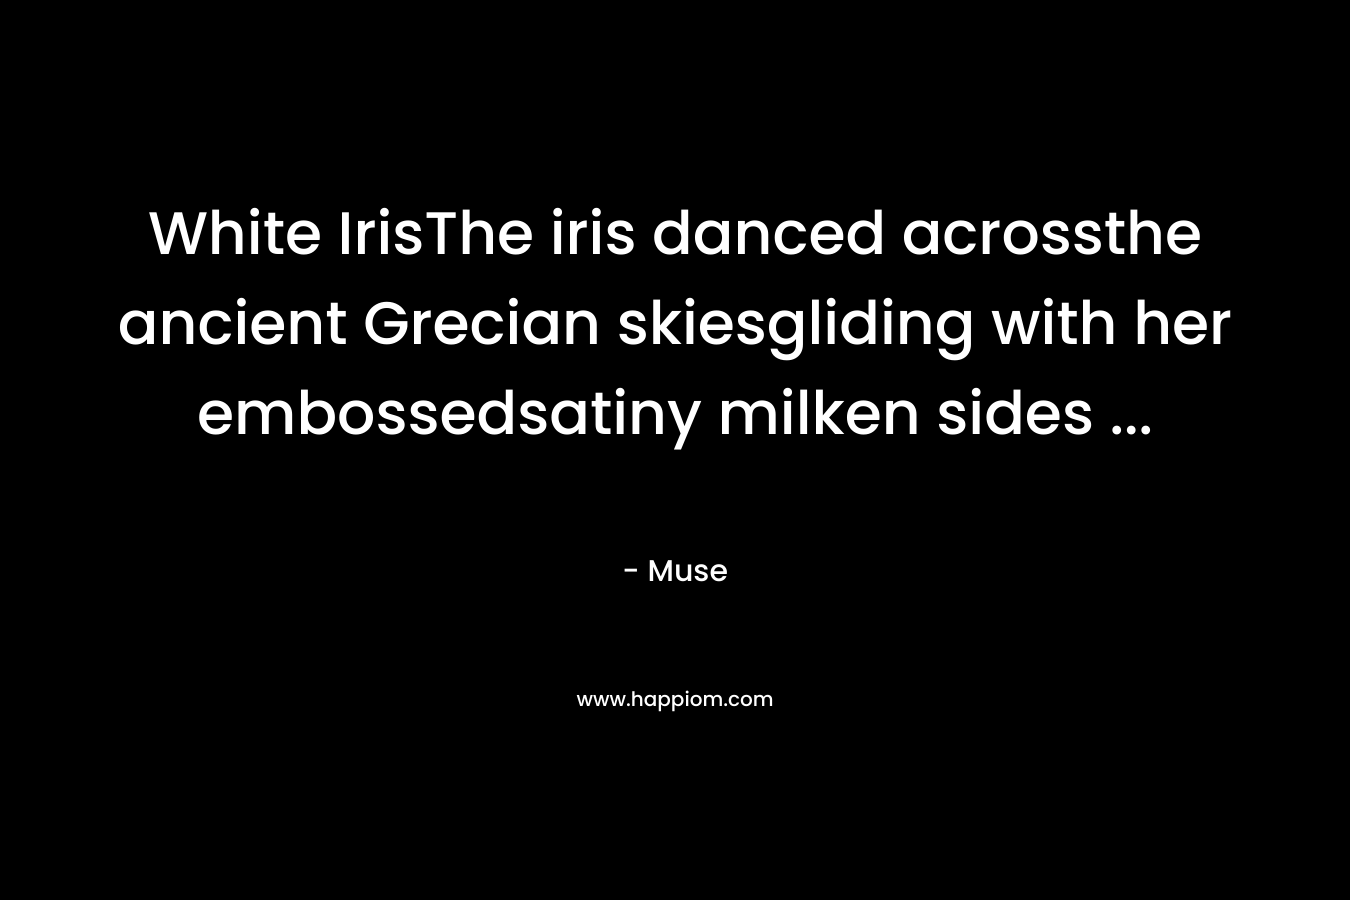 White IrisThe iris danced acrossthe ancient Grecian skiesgliding with her embossedsatiny milken sides ...